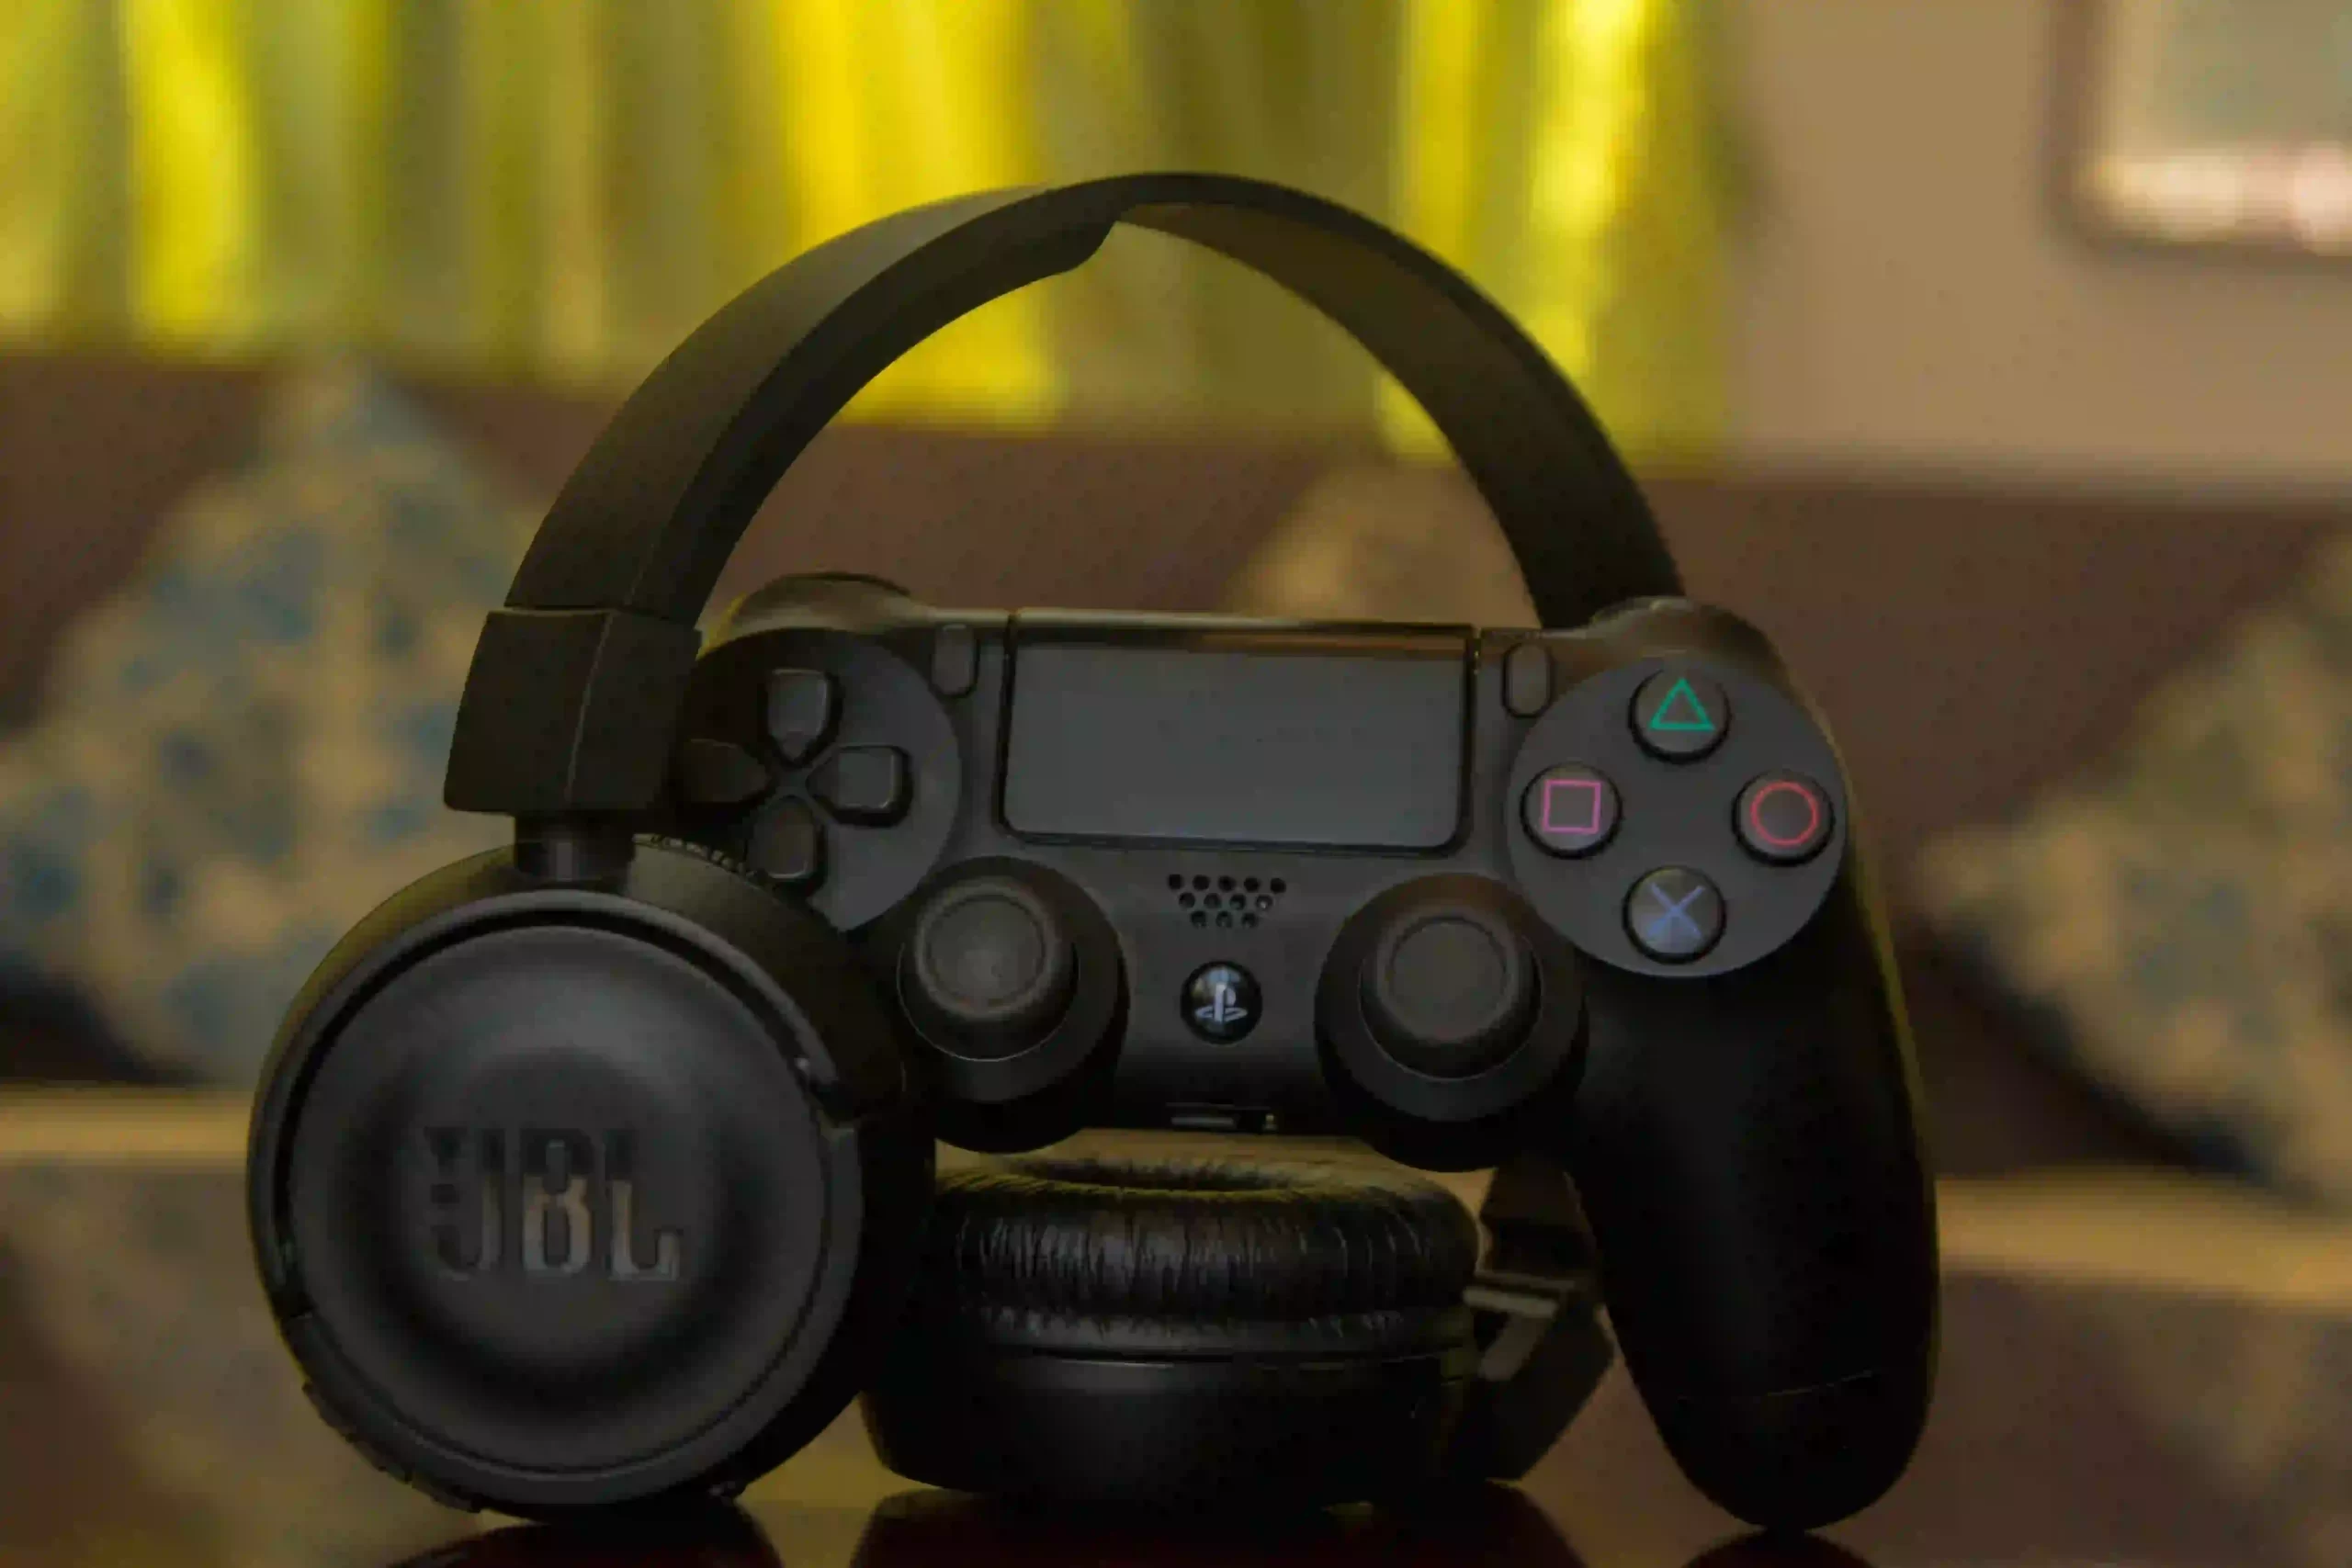 How to talk through PS4 controller without headphones